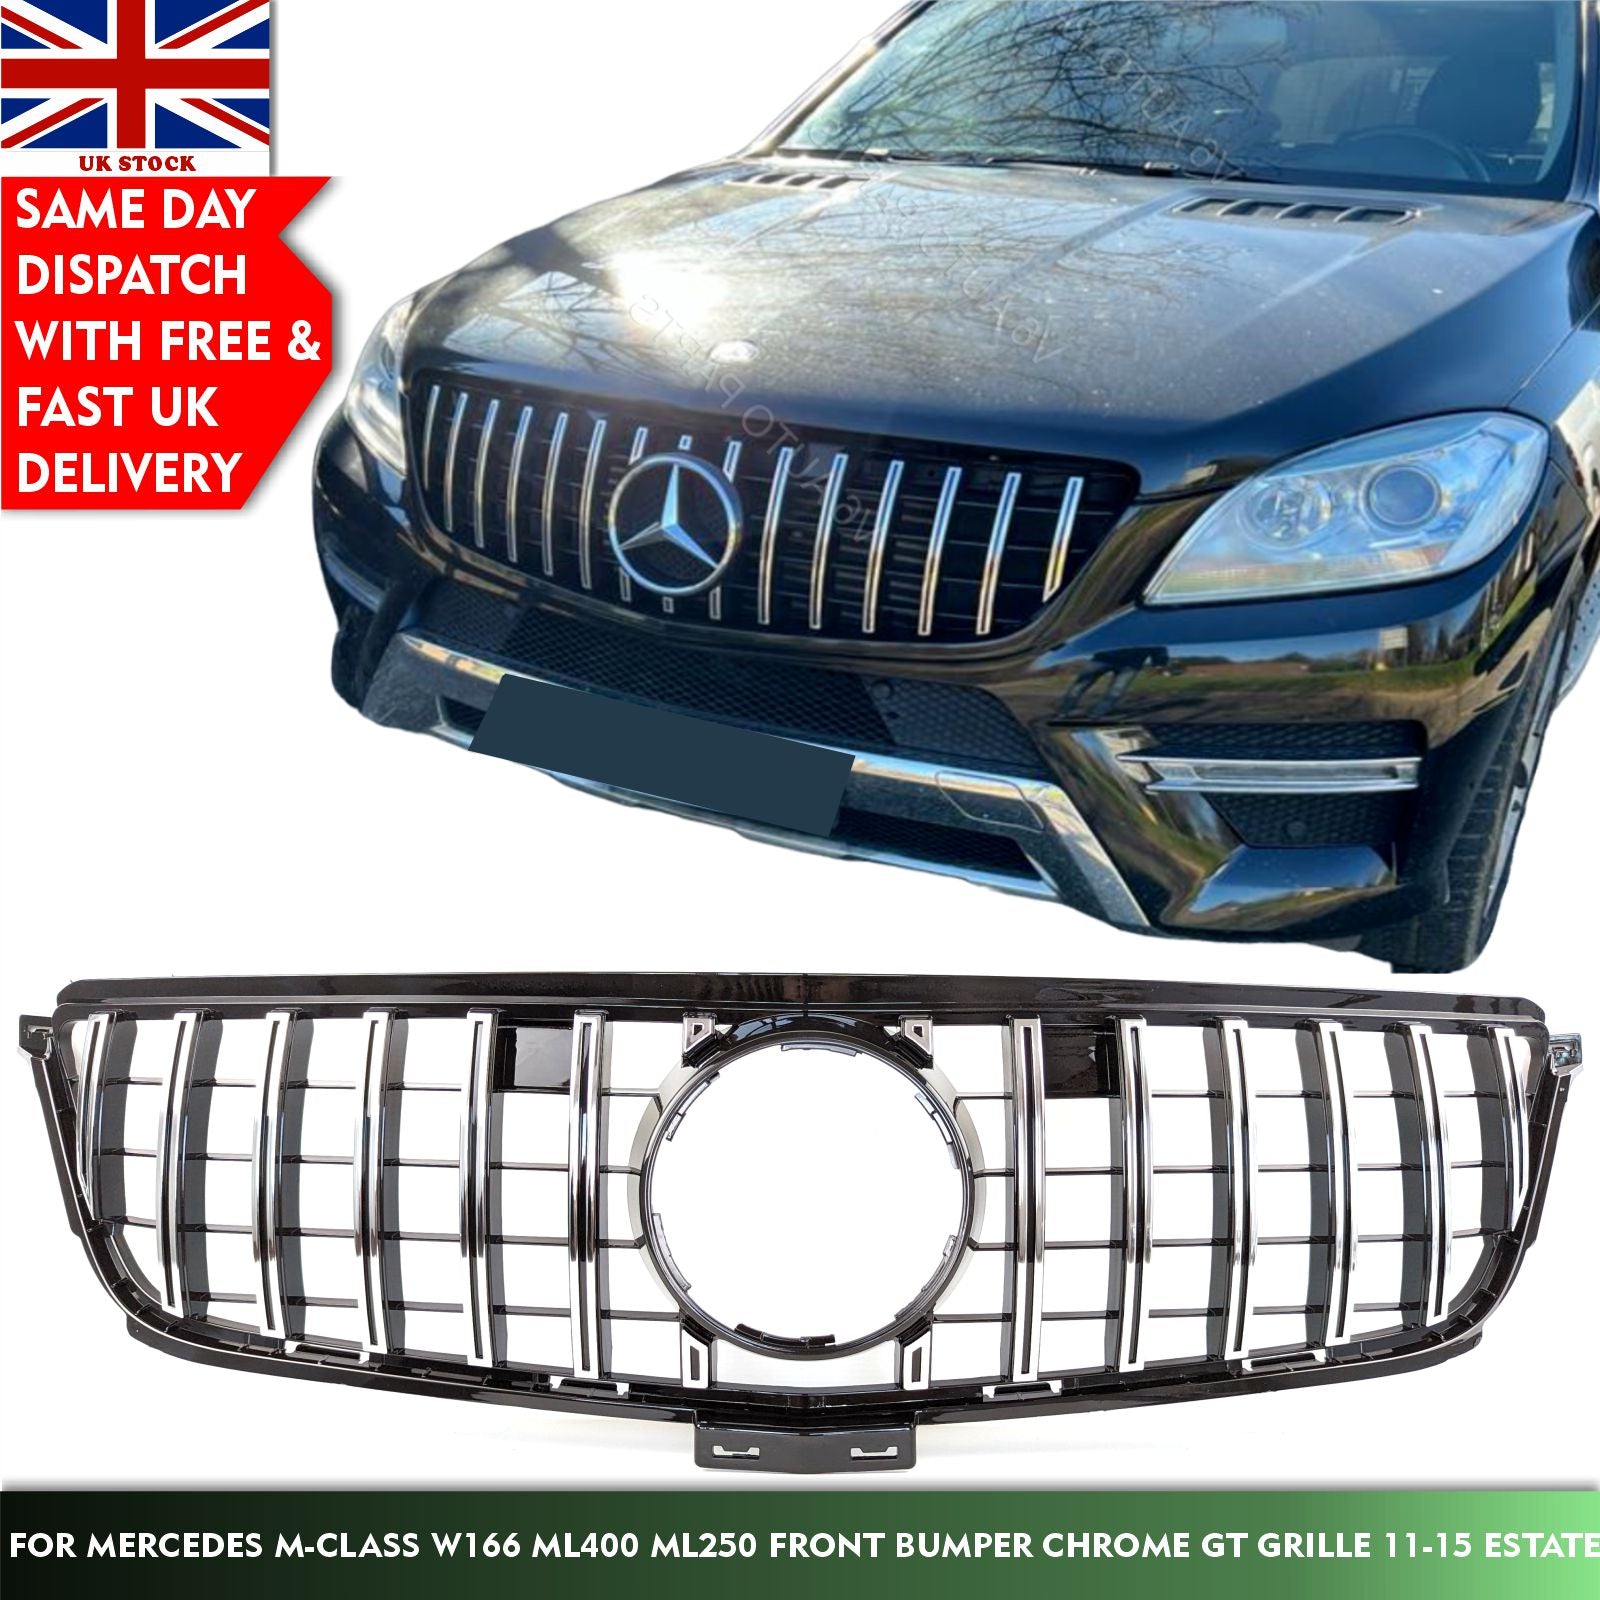 For Mercedes W166 M-Class ML250 Front Bumper Grille Panamericana 2011 - 2015 GTR